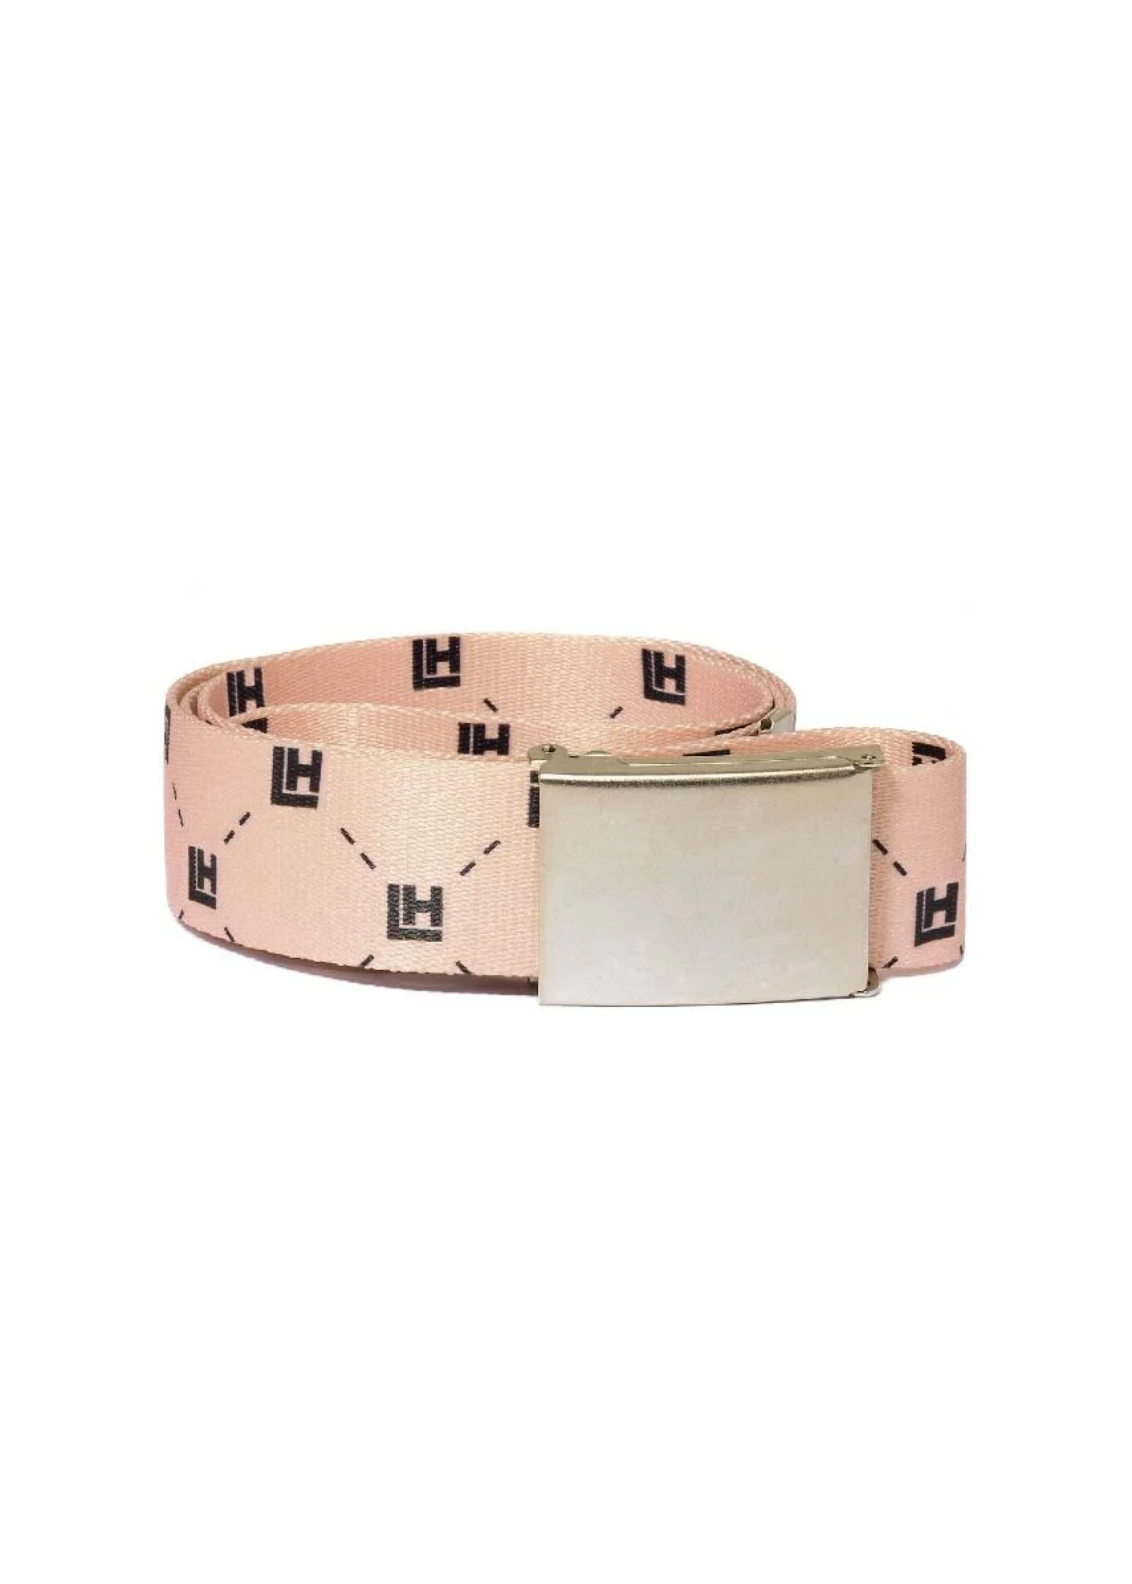 TRIBAL LOVE BELT - NUDE - EXCLUSIVE Belts from LOCAL HEROES - Just $25.00! SHOP NOW AT IAMINHATELOVE BOTH IN STORE FOR CYPRUS AND ONLINE WORLDWIDE